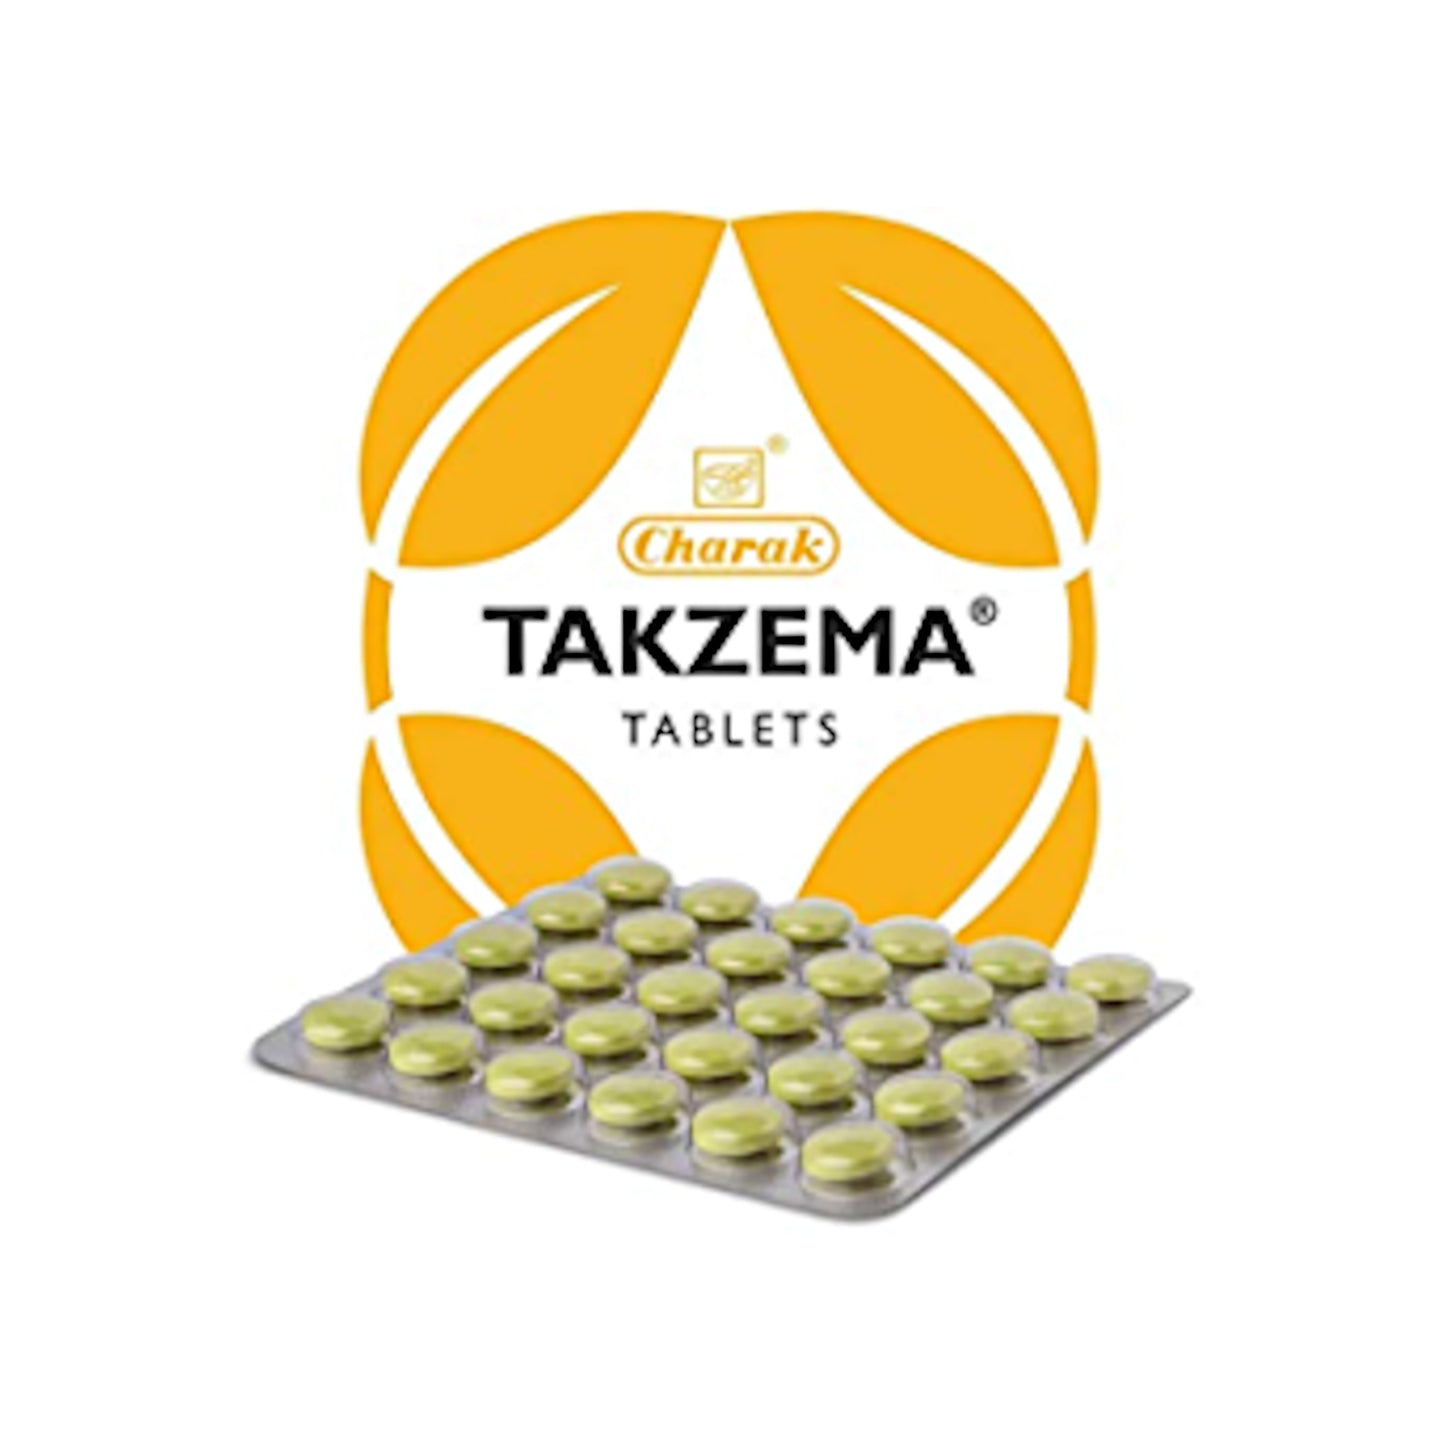 Image of Charak Takzema 30 Tablets promote skin healing and alleviate symptoms of skin disorders like eczema and dermatitis.